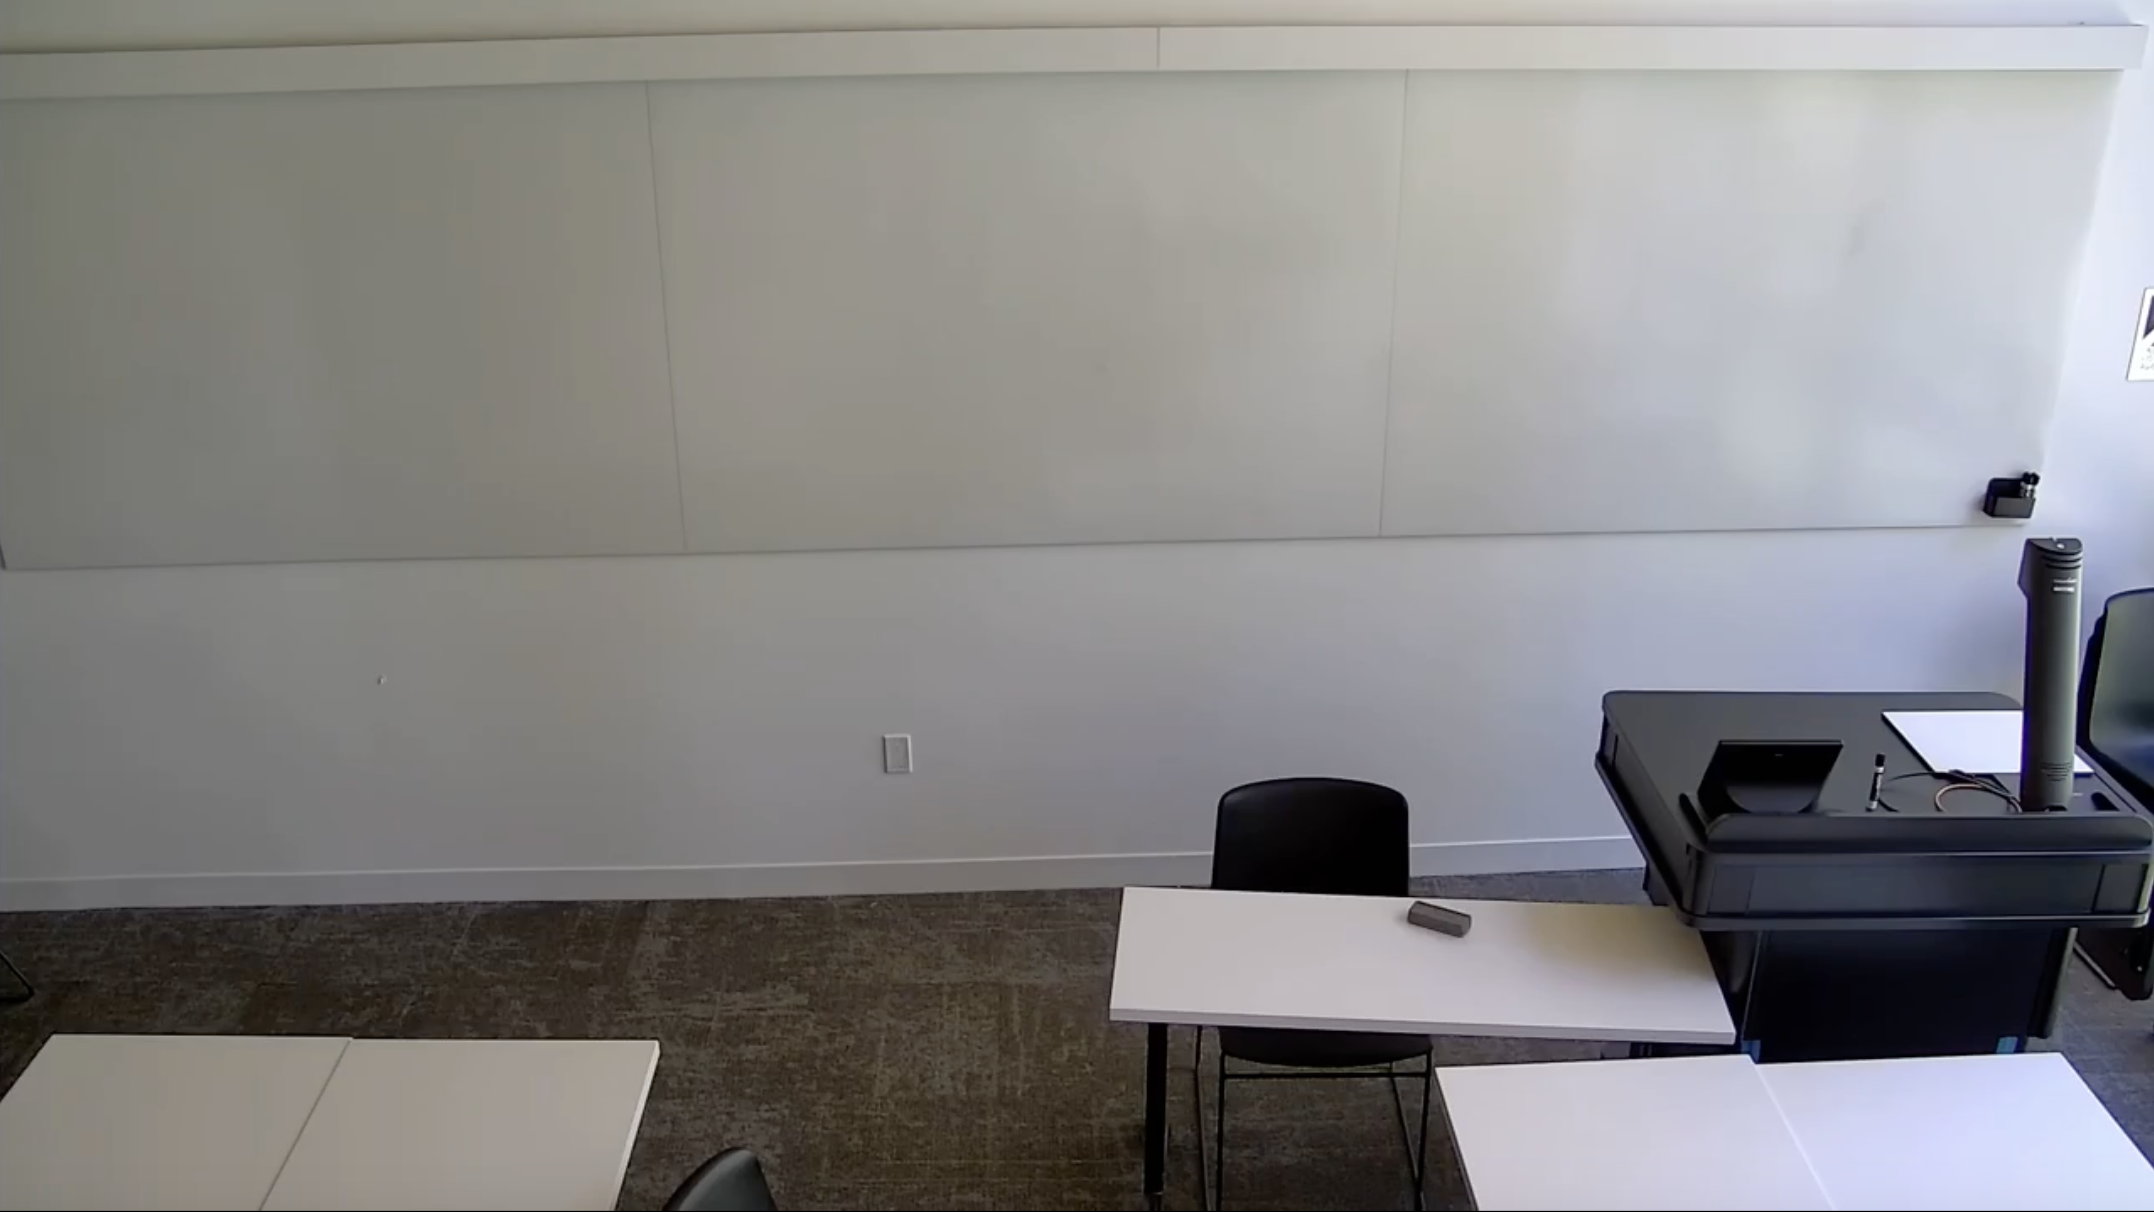 Image of lecture capture front-facing classroom camera view in Kresge 3301